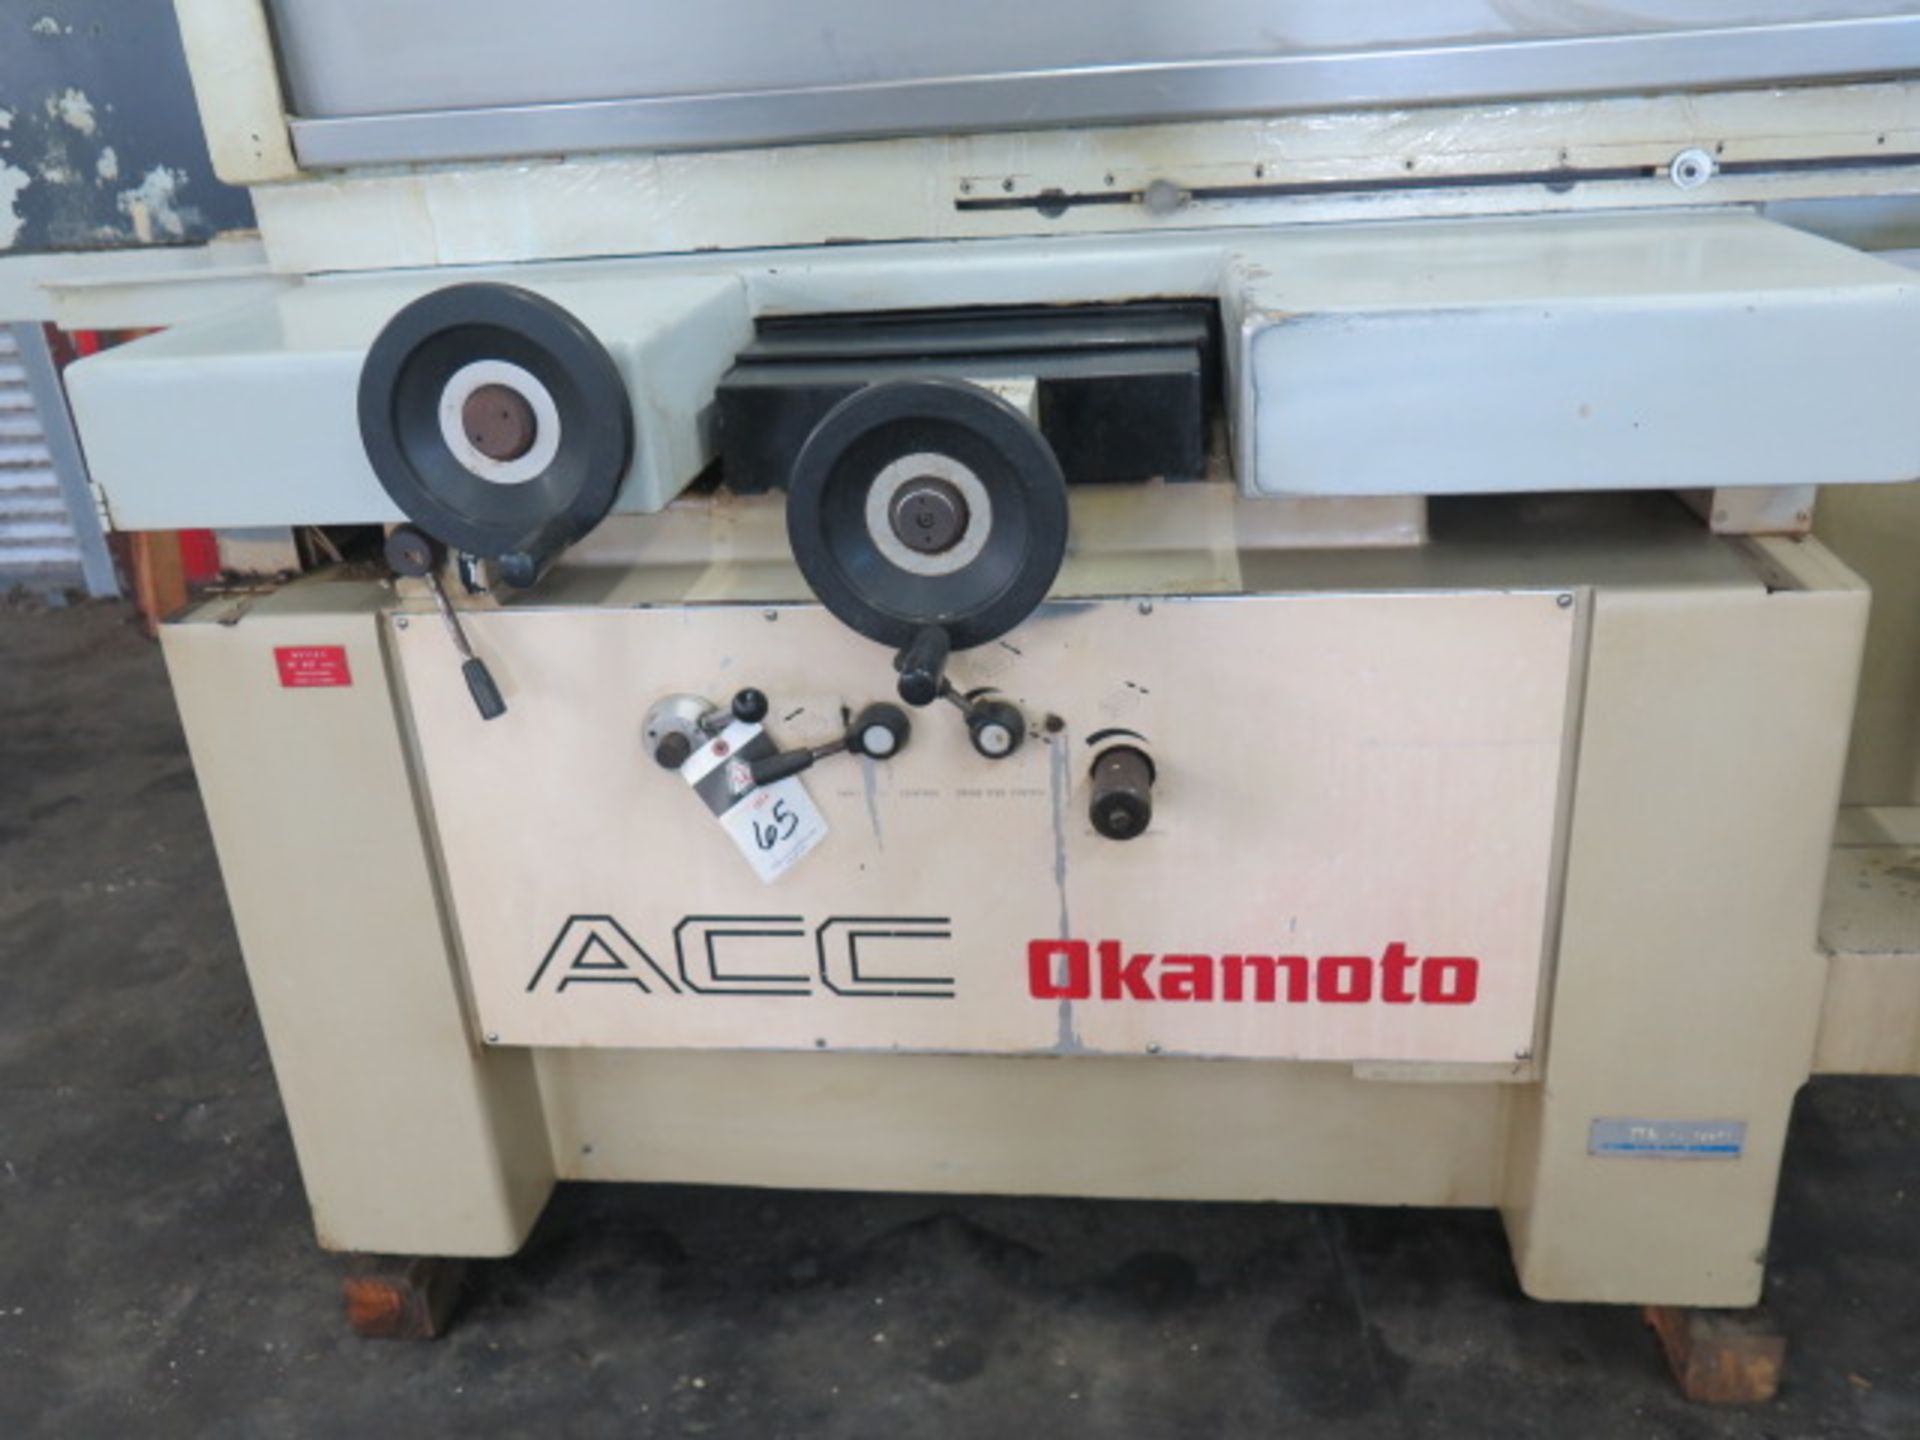 Okamoto ACC-16-32DX 16” x 32” Automatic Surface Grinder s/n 68234 w/ Okamoto Controls, SOLD AS IS - Image 7 of 13